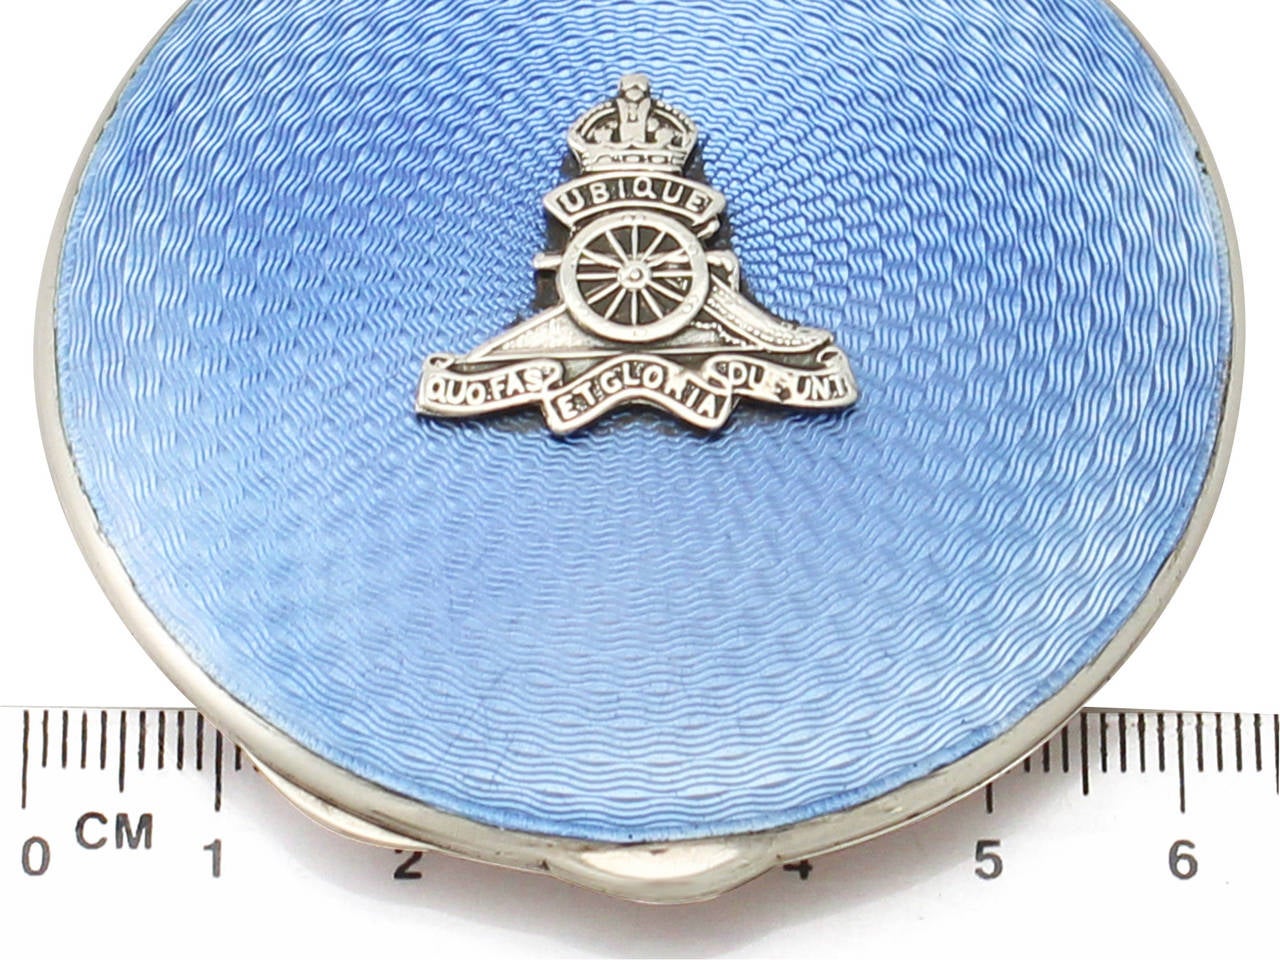 Antique 1939 Sterling Silver and Guilloche Enamel Compact For Sale 3